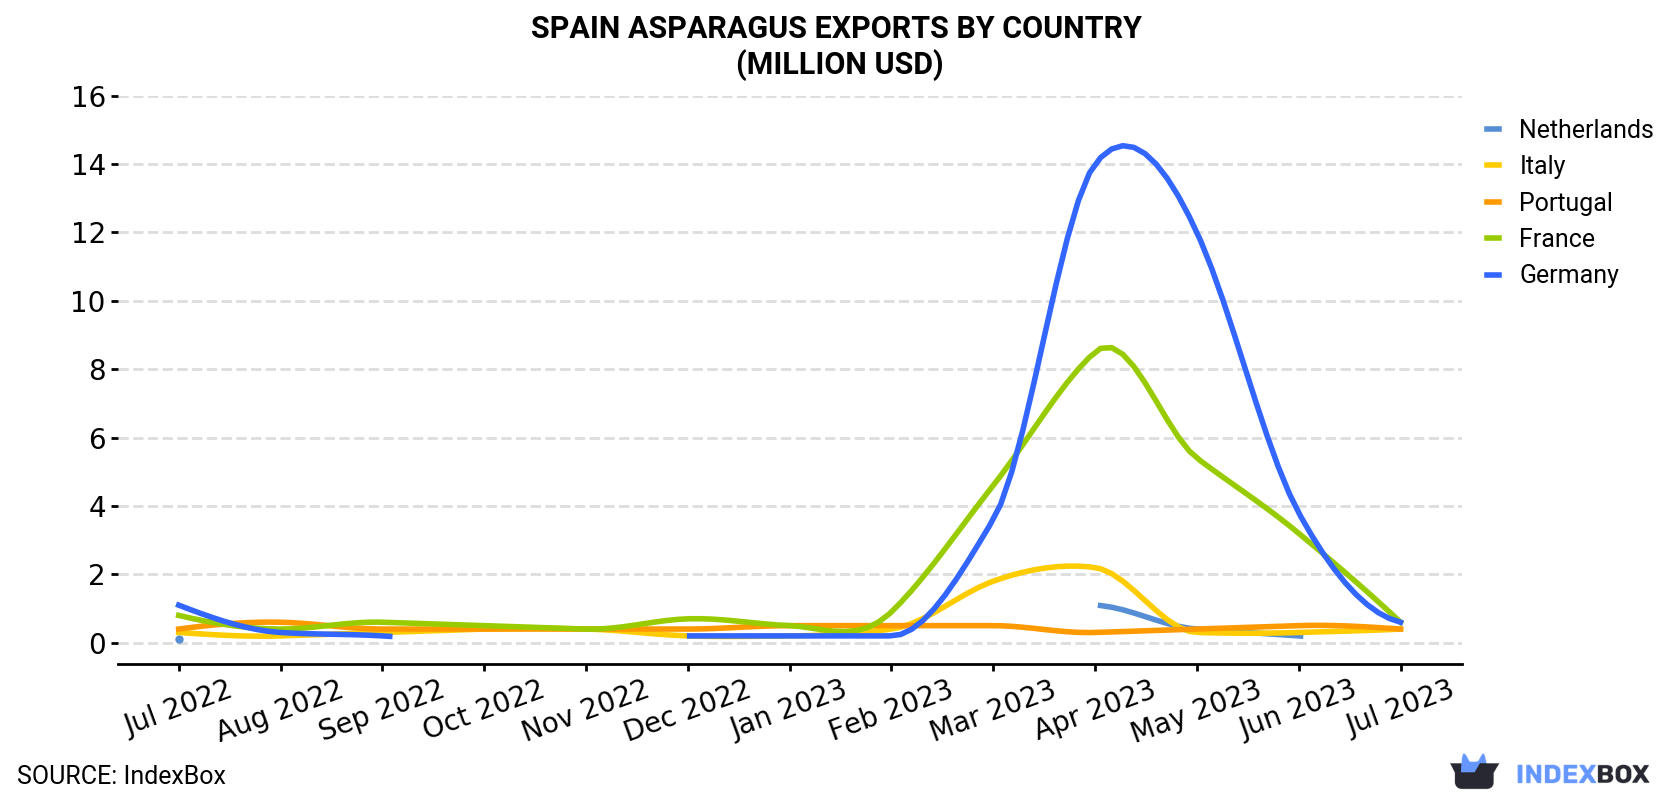 Spain Asparagus Exports By Country (Million USD)